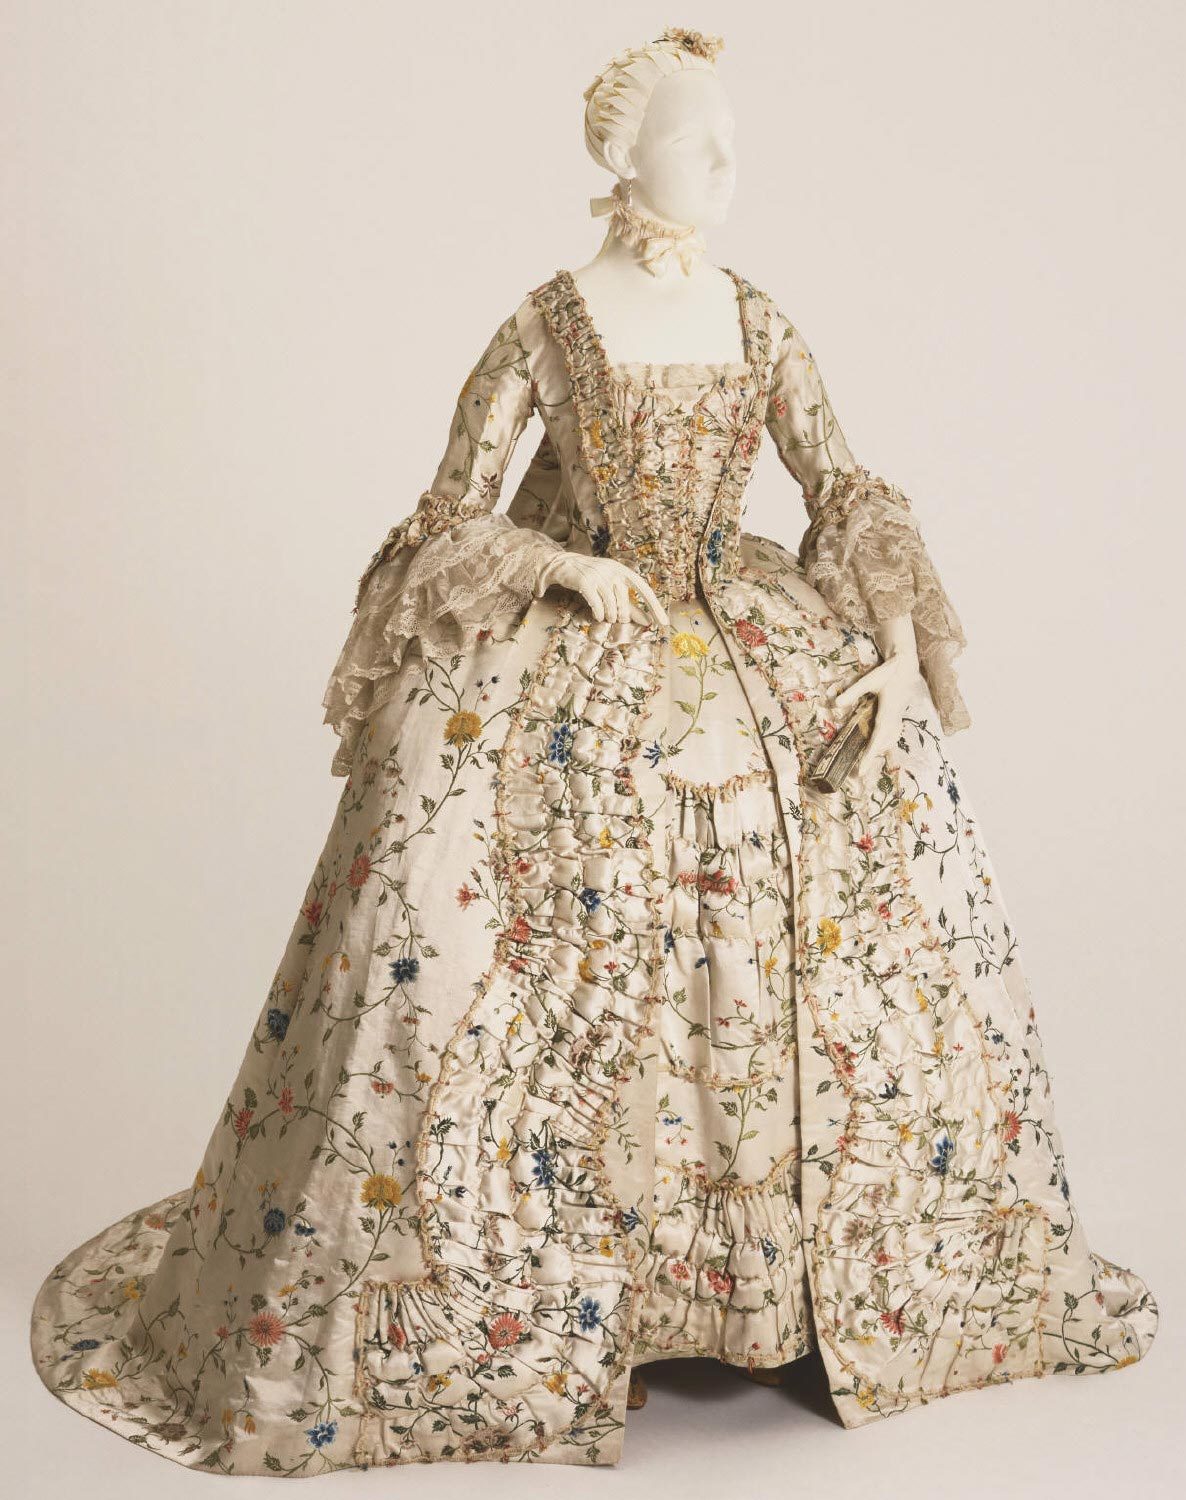 fripperiesandfobs:
“ Robe a la francaise ca. 1755-60
From the Philadelphia Museum of Art
”